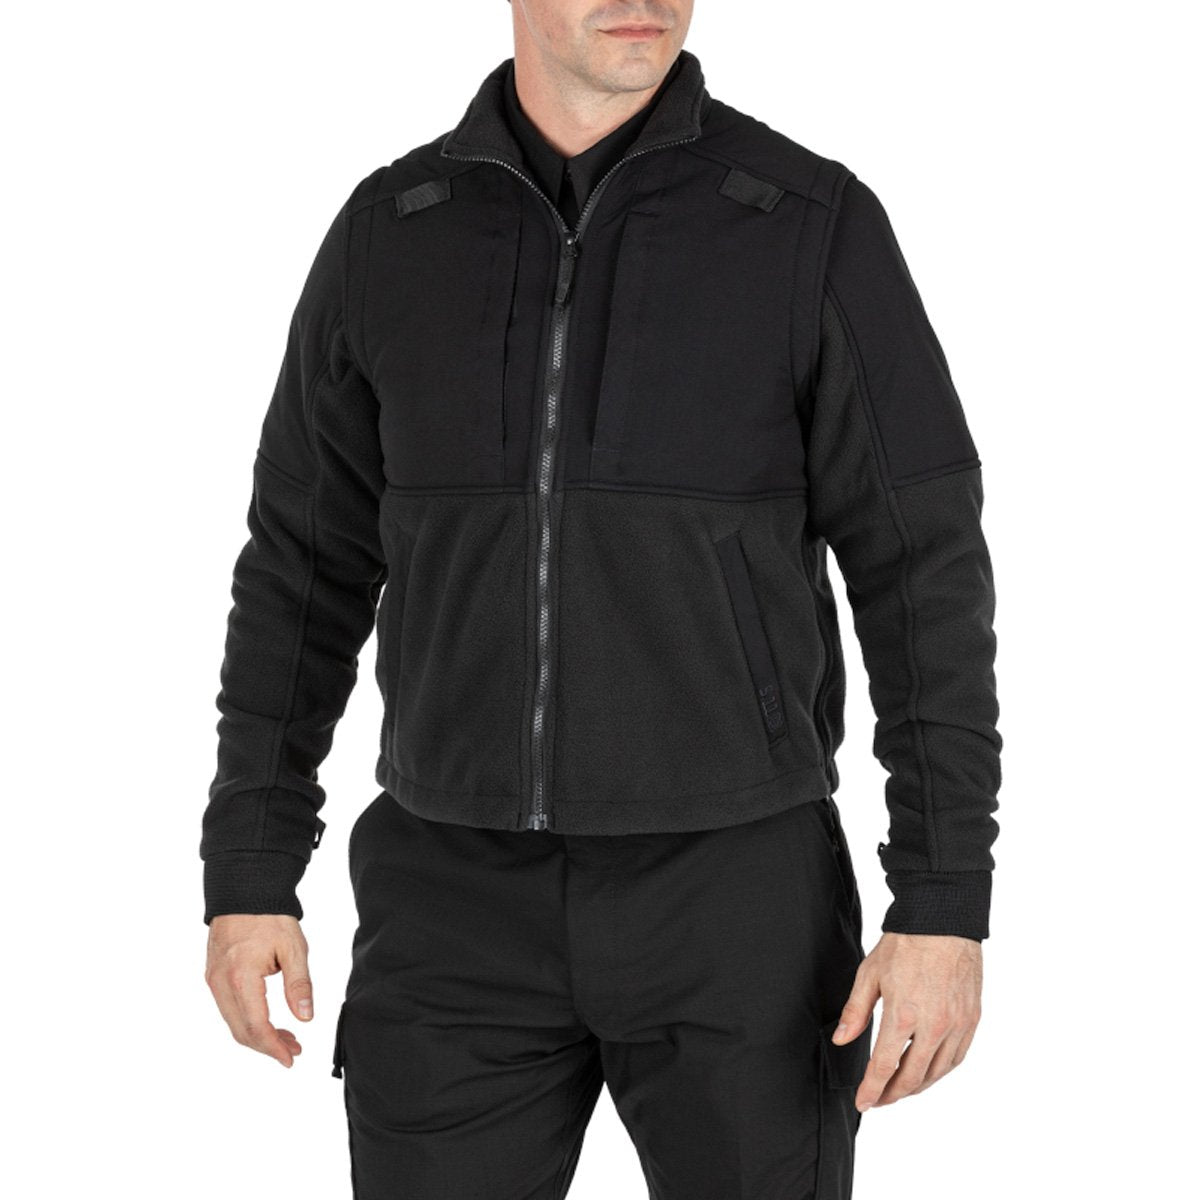 5.11 Tactical 5-IN-1 Jacket 2.0 Outerwear 5.11 Tactical Tactical Gear Supplier Tactical Distributors Australia